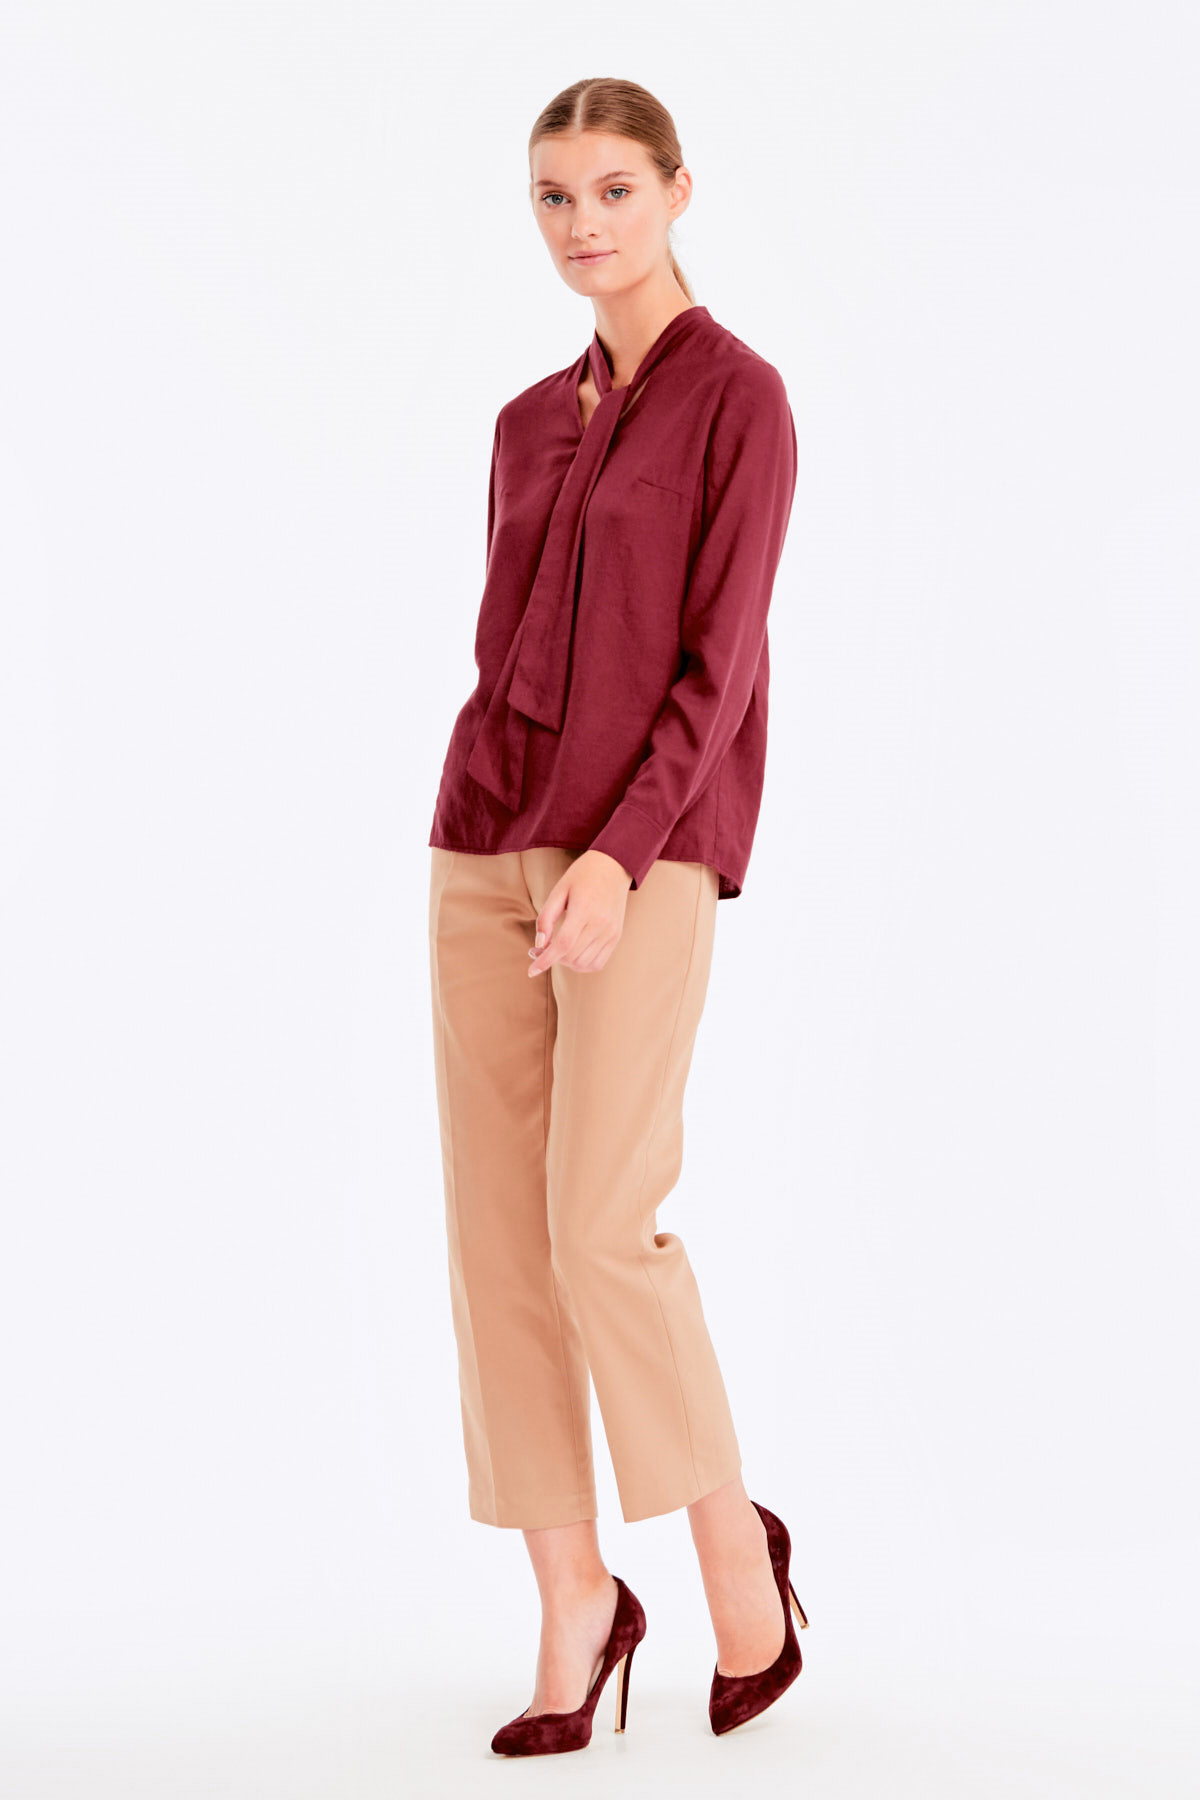 Burgundy blouse with ties, photo 4